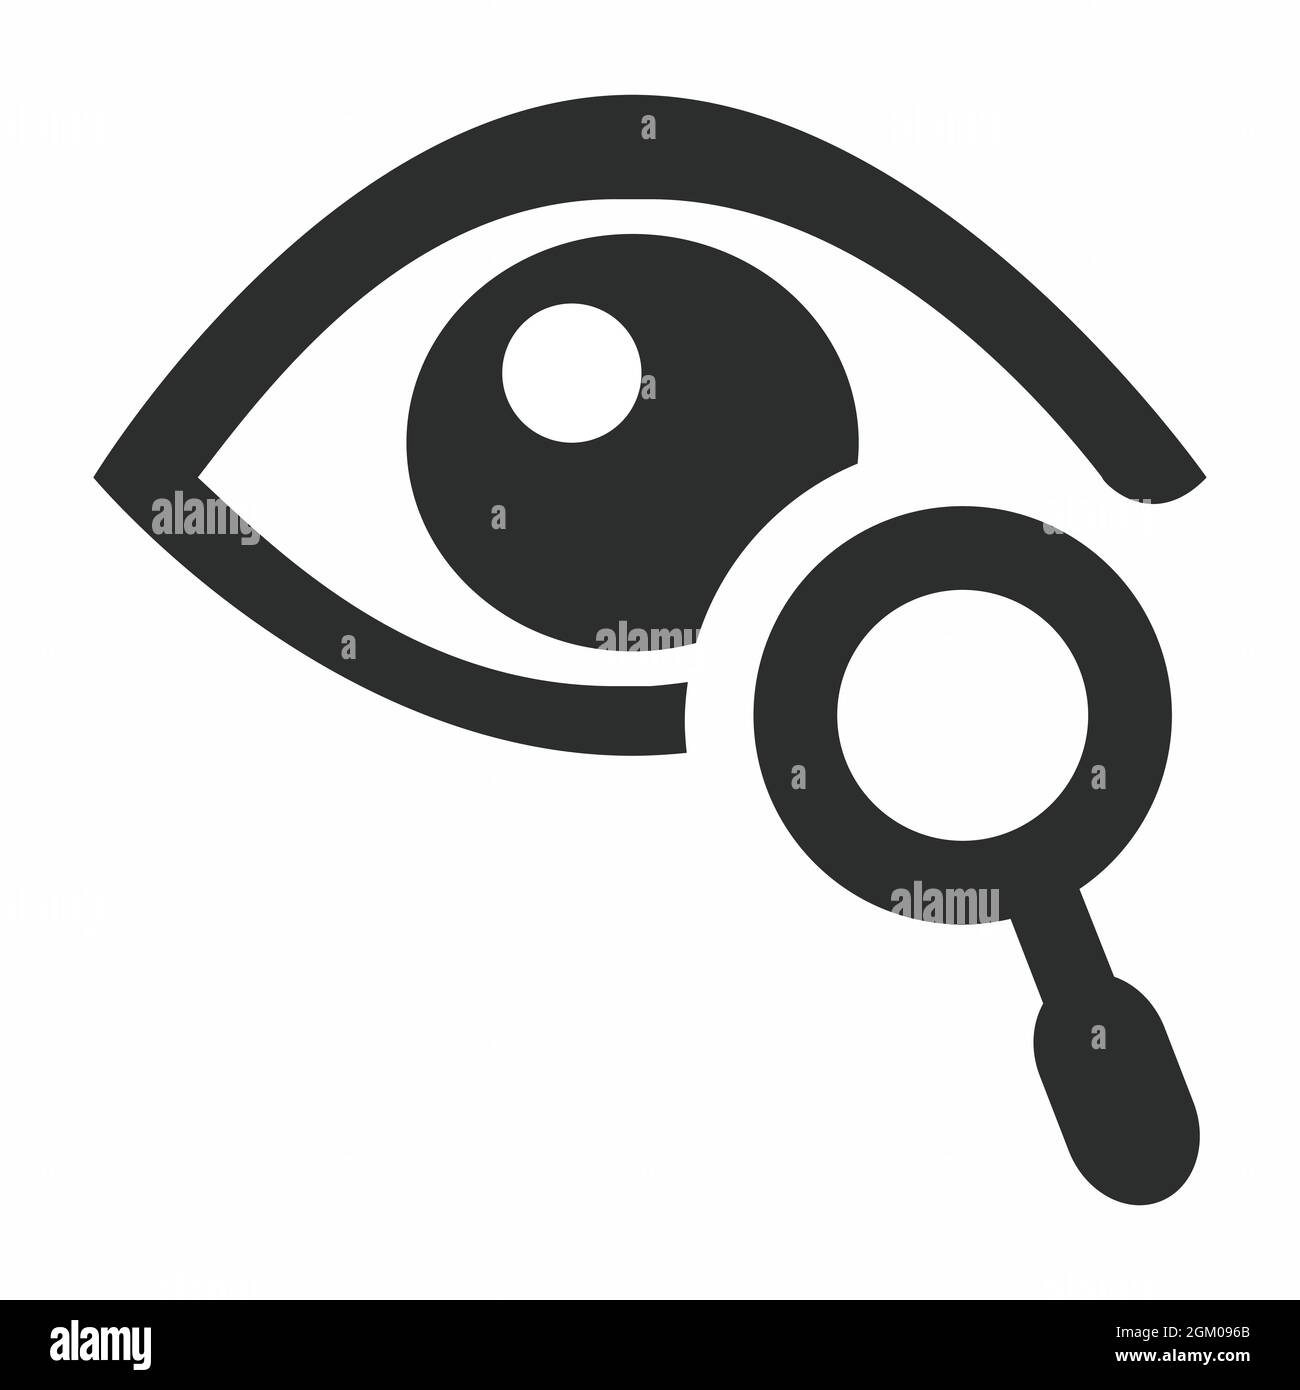 Icon Vector of Eye Exam 4 - Glyph Style - Simple illustration, Editable stroke, Design template vector, Good for prints, posters, advertisements, anno Stock Vector